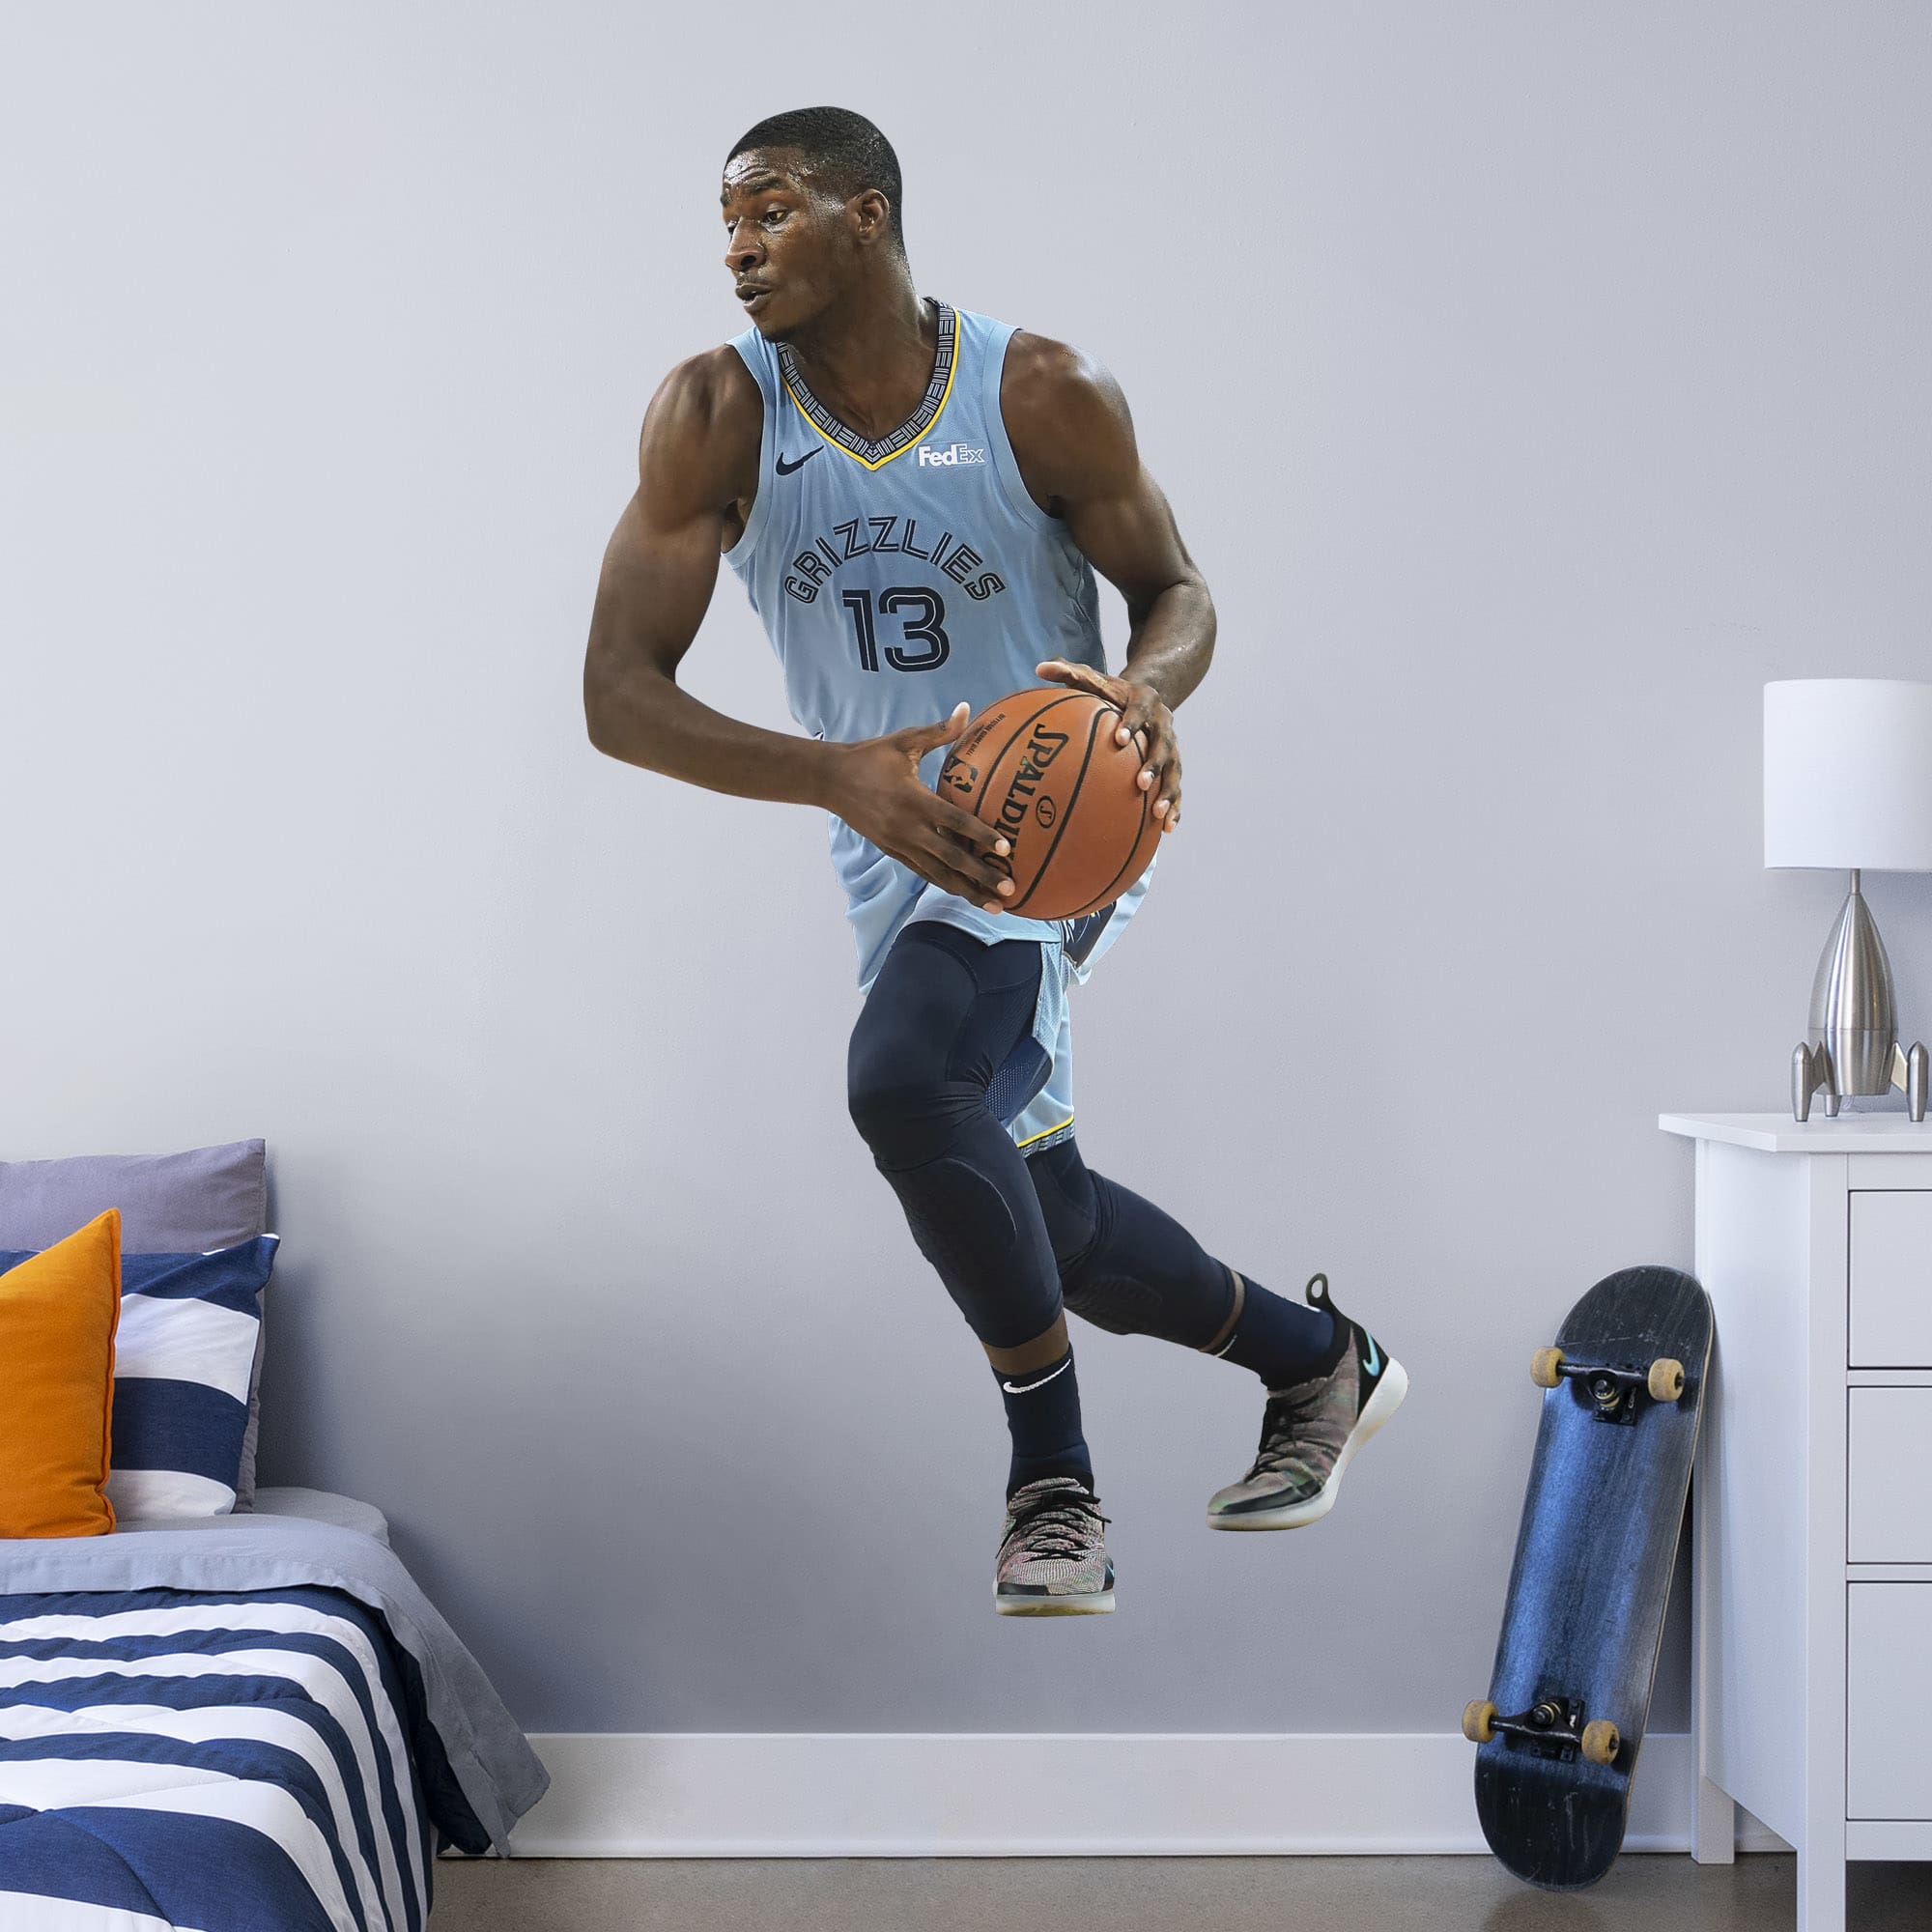 Jaren Jackson Jr. for Memphis Grizzlies - Officially Licensed NBA Removable Wall Decal Life-Size Athlete + 2 Decals (42"W x 76"H